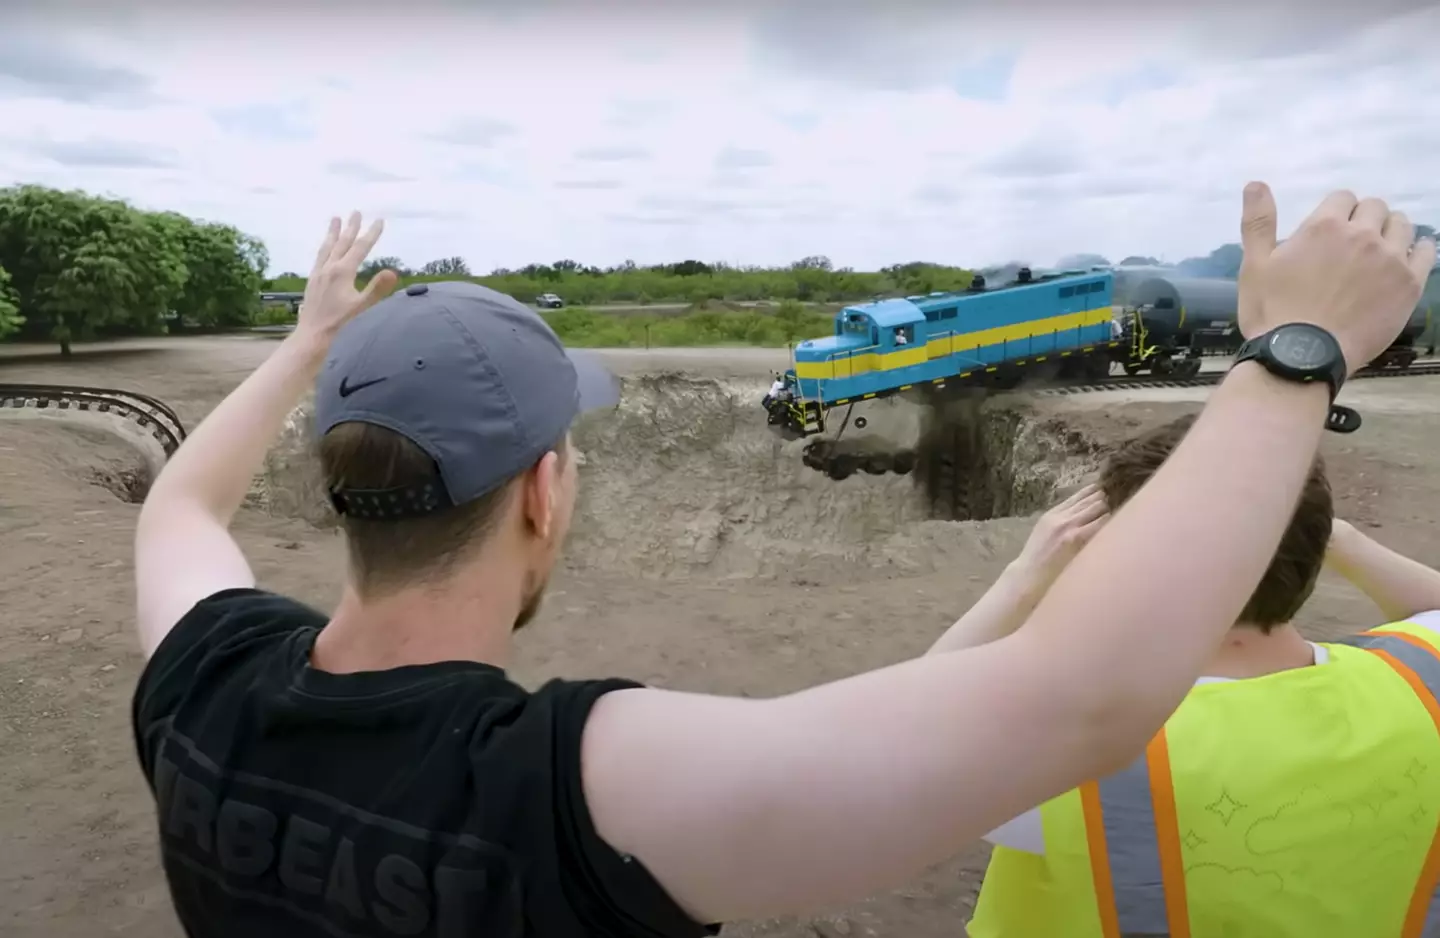 MrBeat's latest stunt saw him crash an actual train into a giant pit.